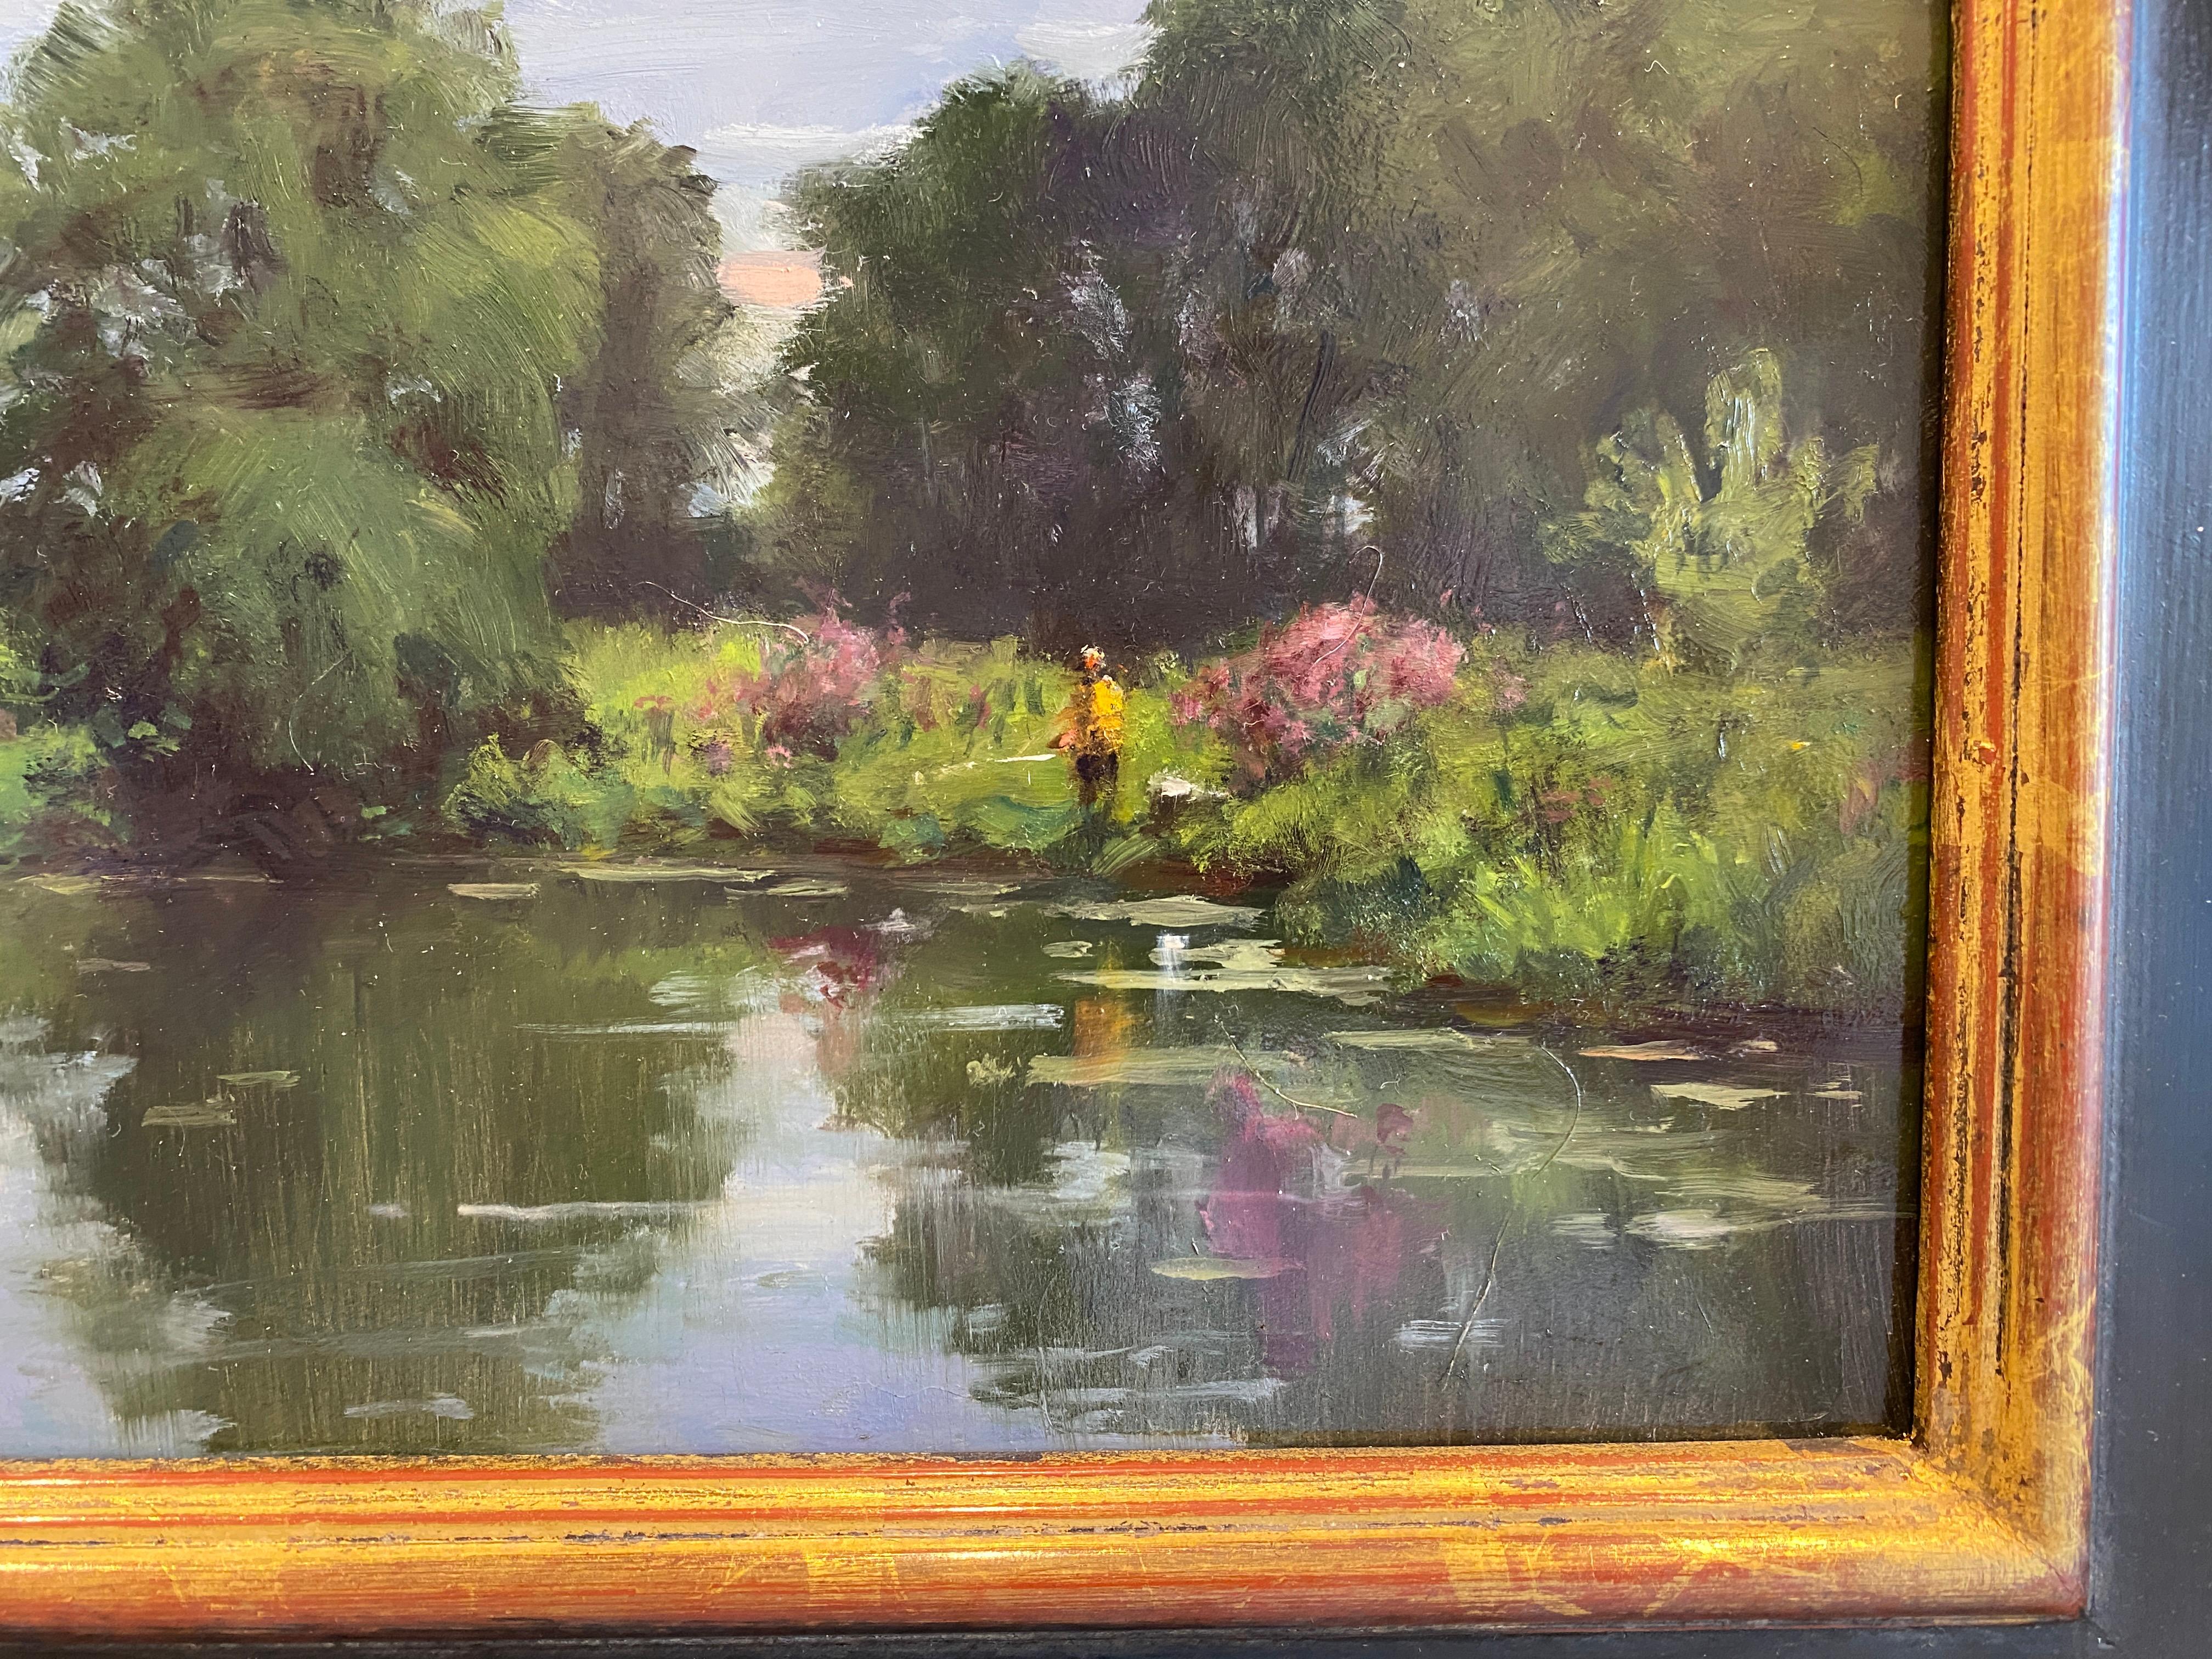 Cloudy Day by the Pond - American Realist Painting by Carl Bretzke